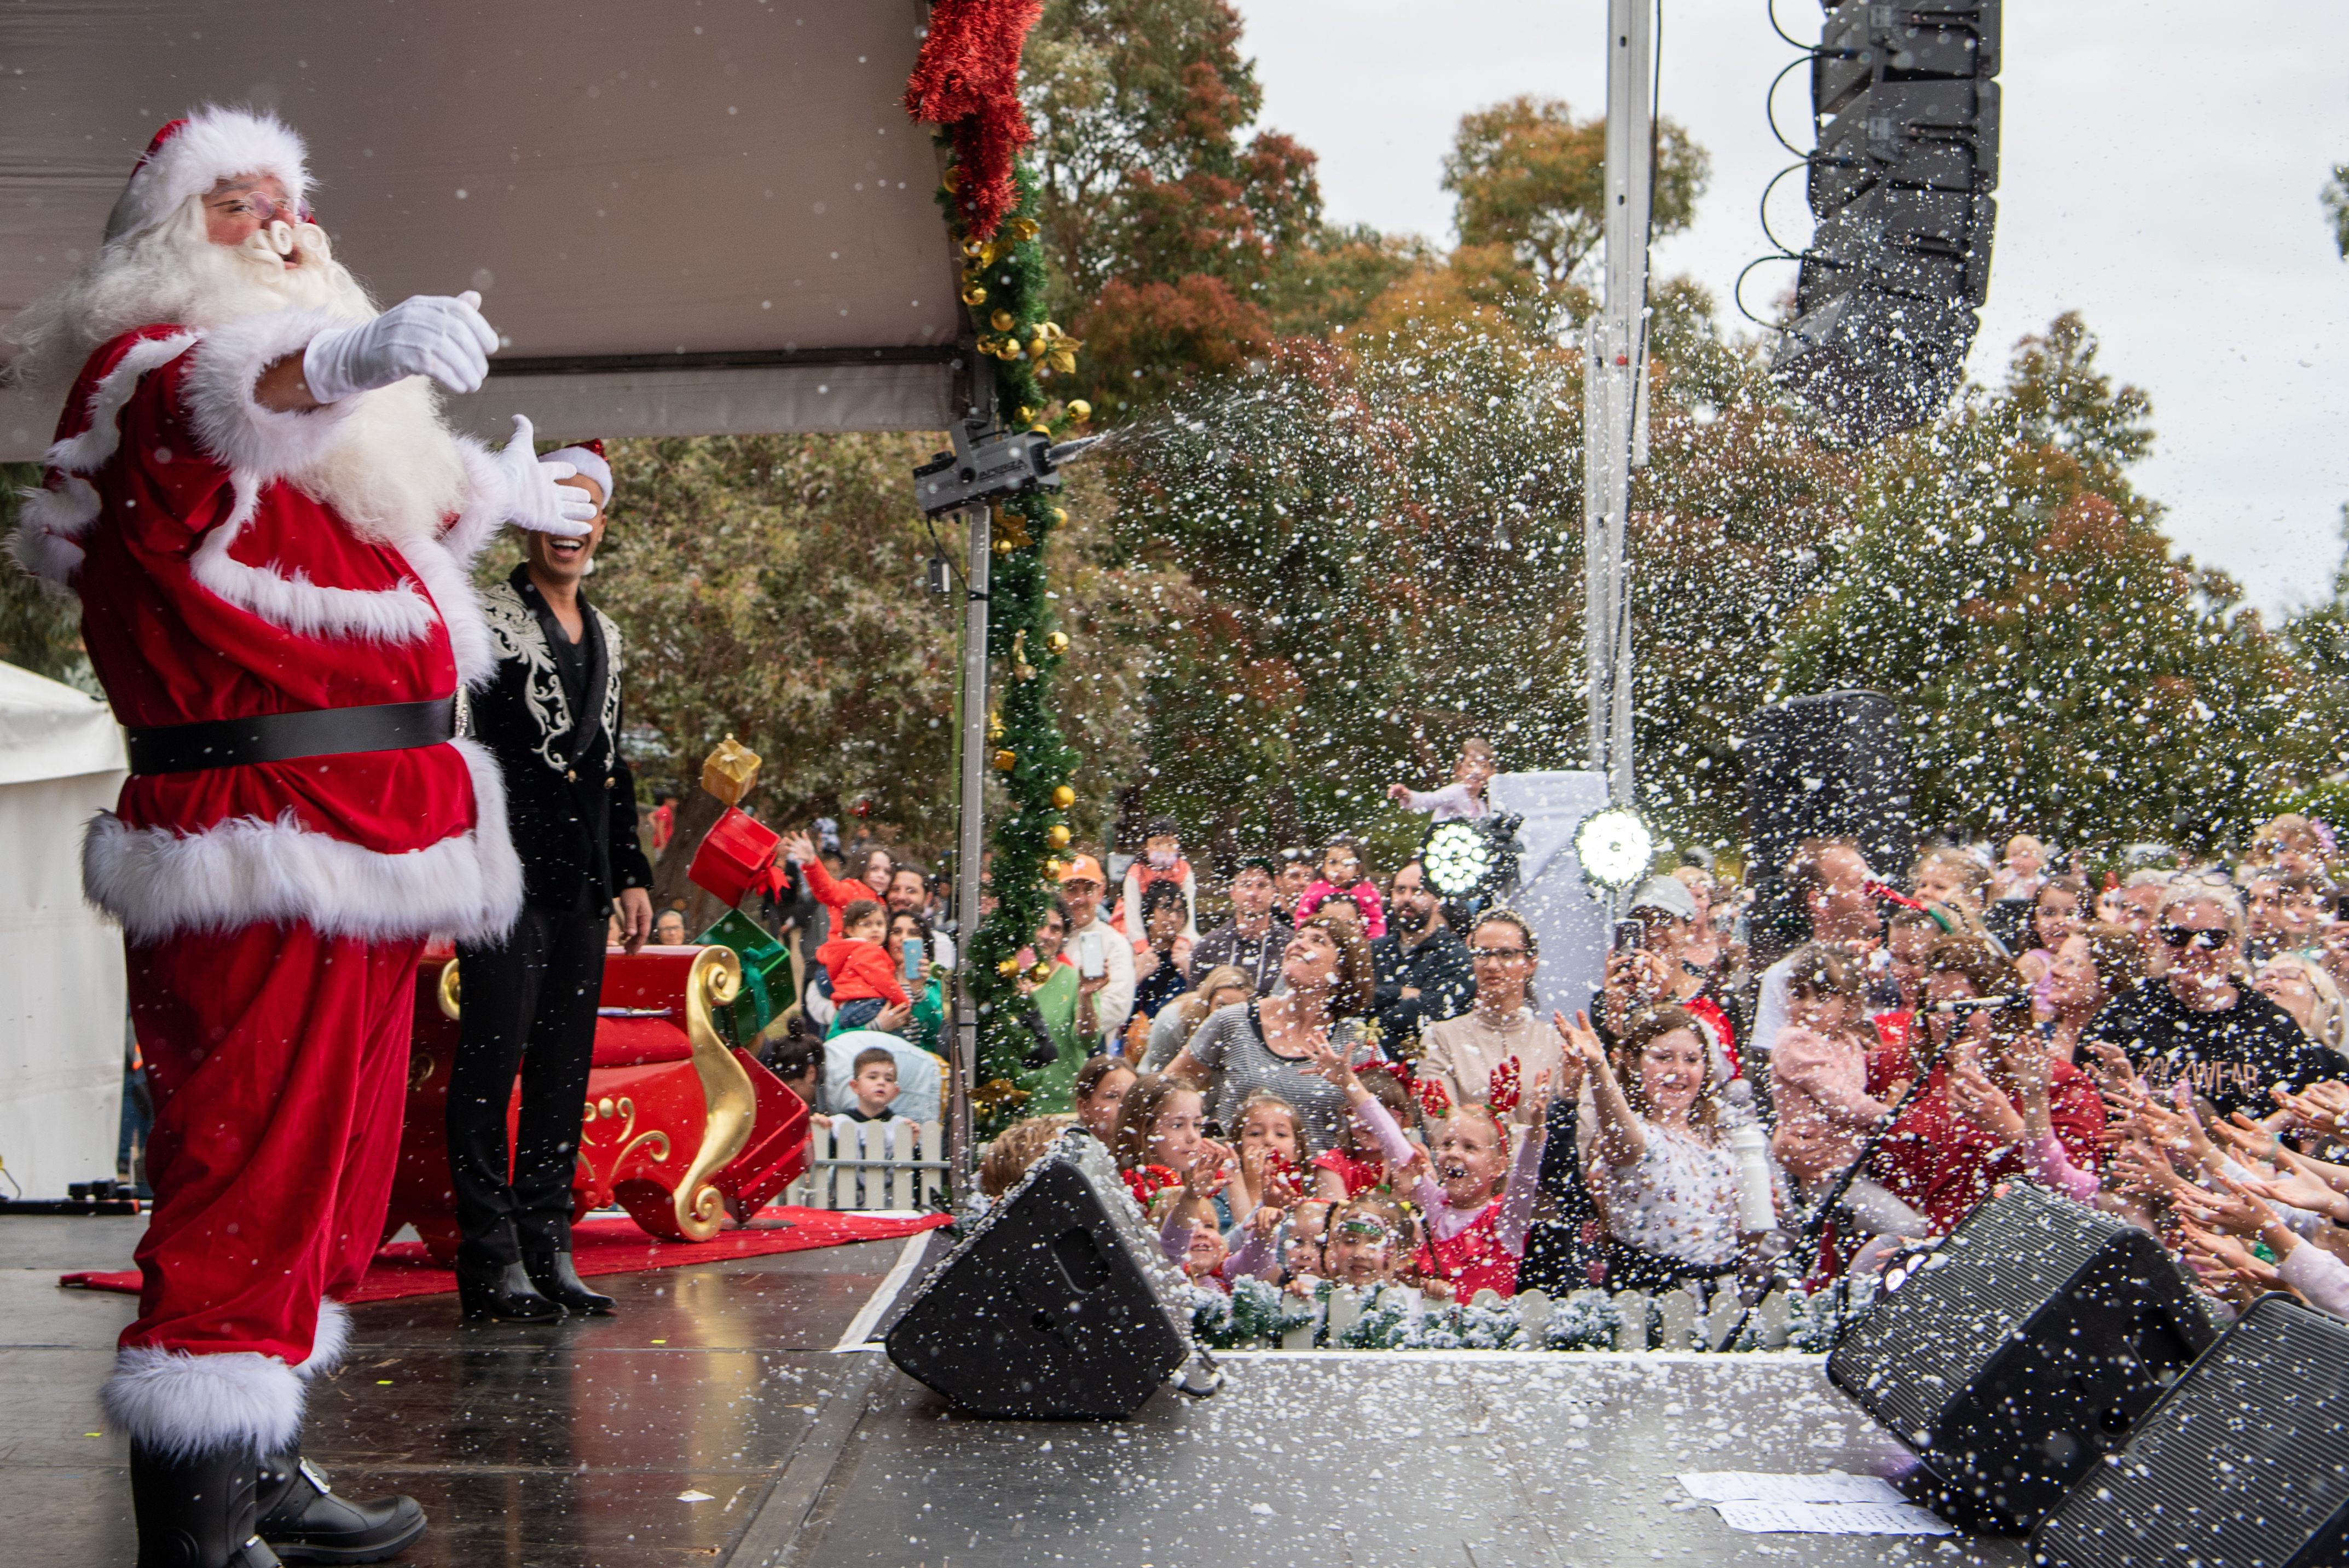 Santa in front of crowd